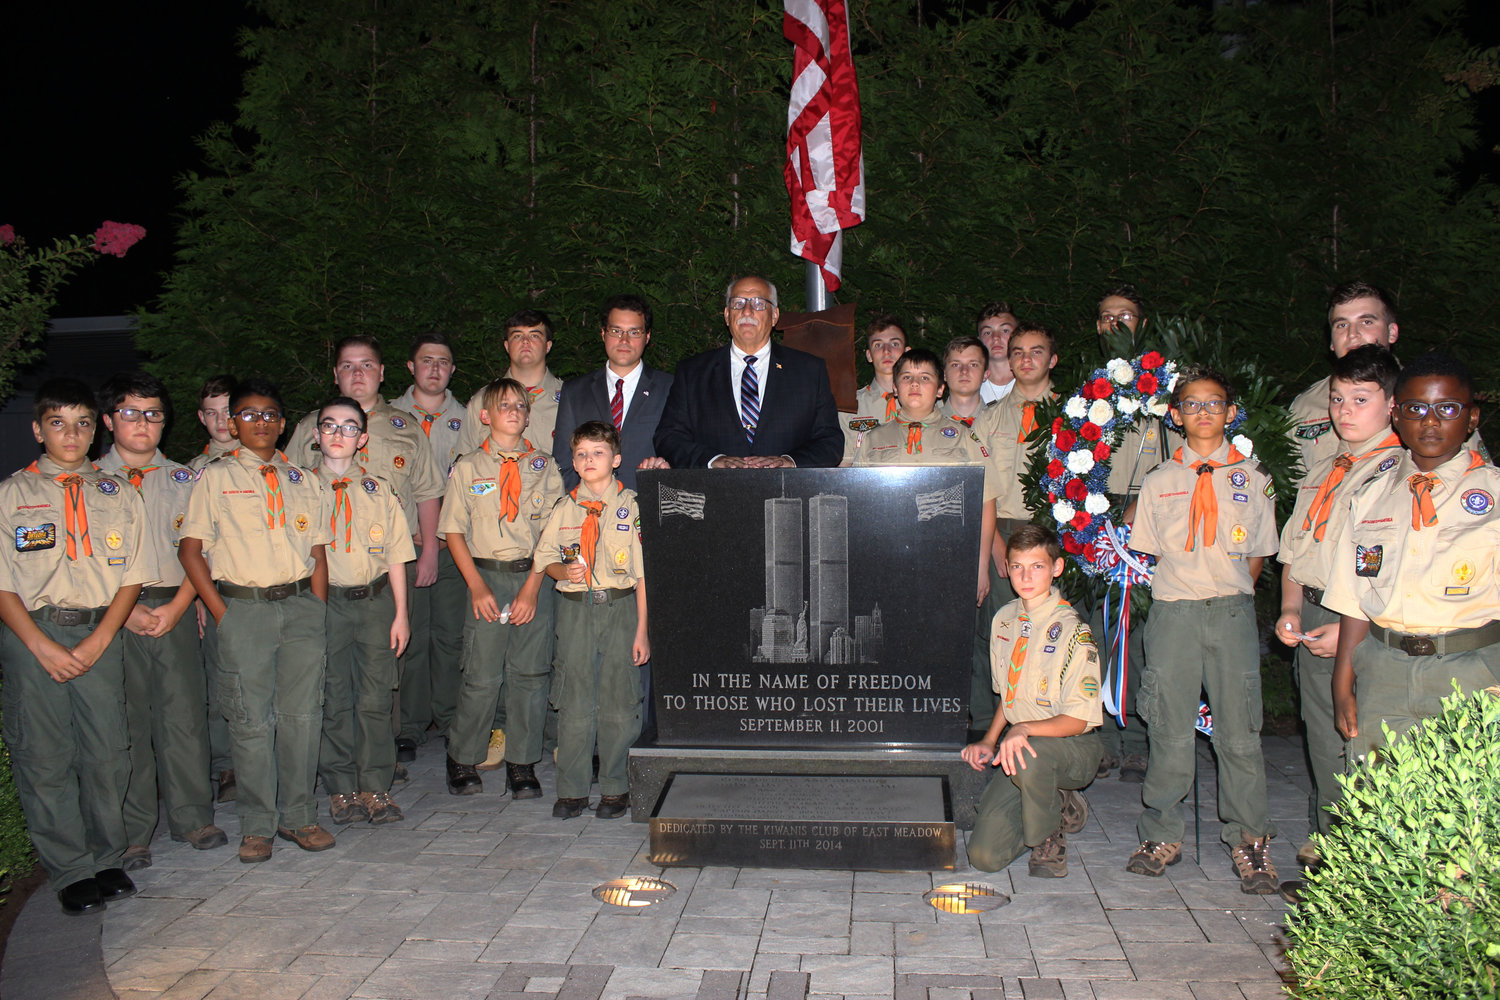 East Meadow Boy Scout Troop 362 paid tribute to those who lost their lives in the Sept. 11 attacks at the East Meadow Fire Department’s annual ceremony in Veterans Memorial Park. With them were State Assemblyman John Mikulin and Hempstead Town Councilman Dennis Dunne.